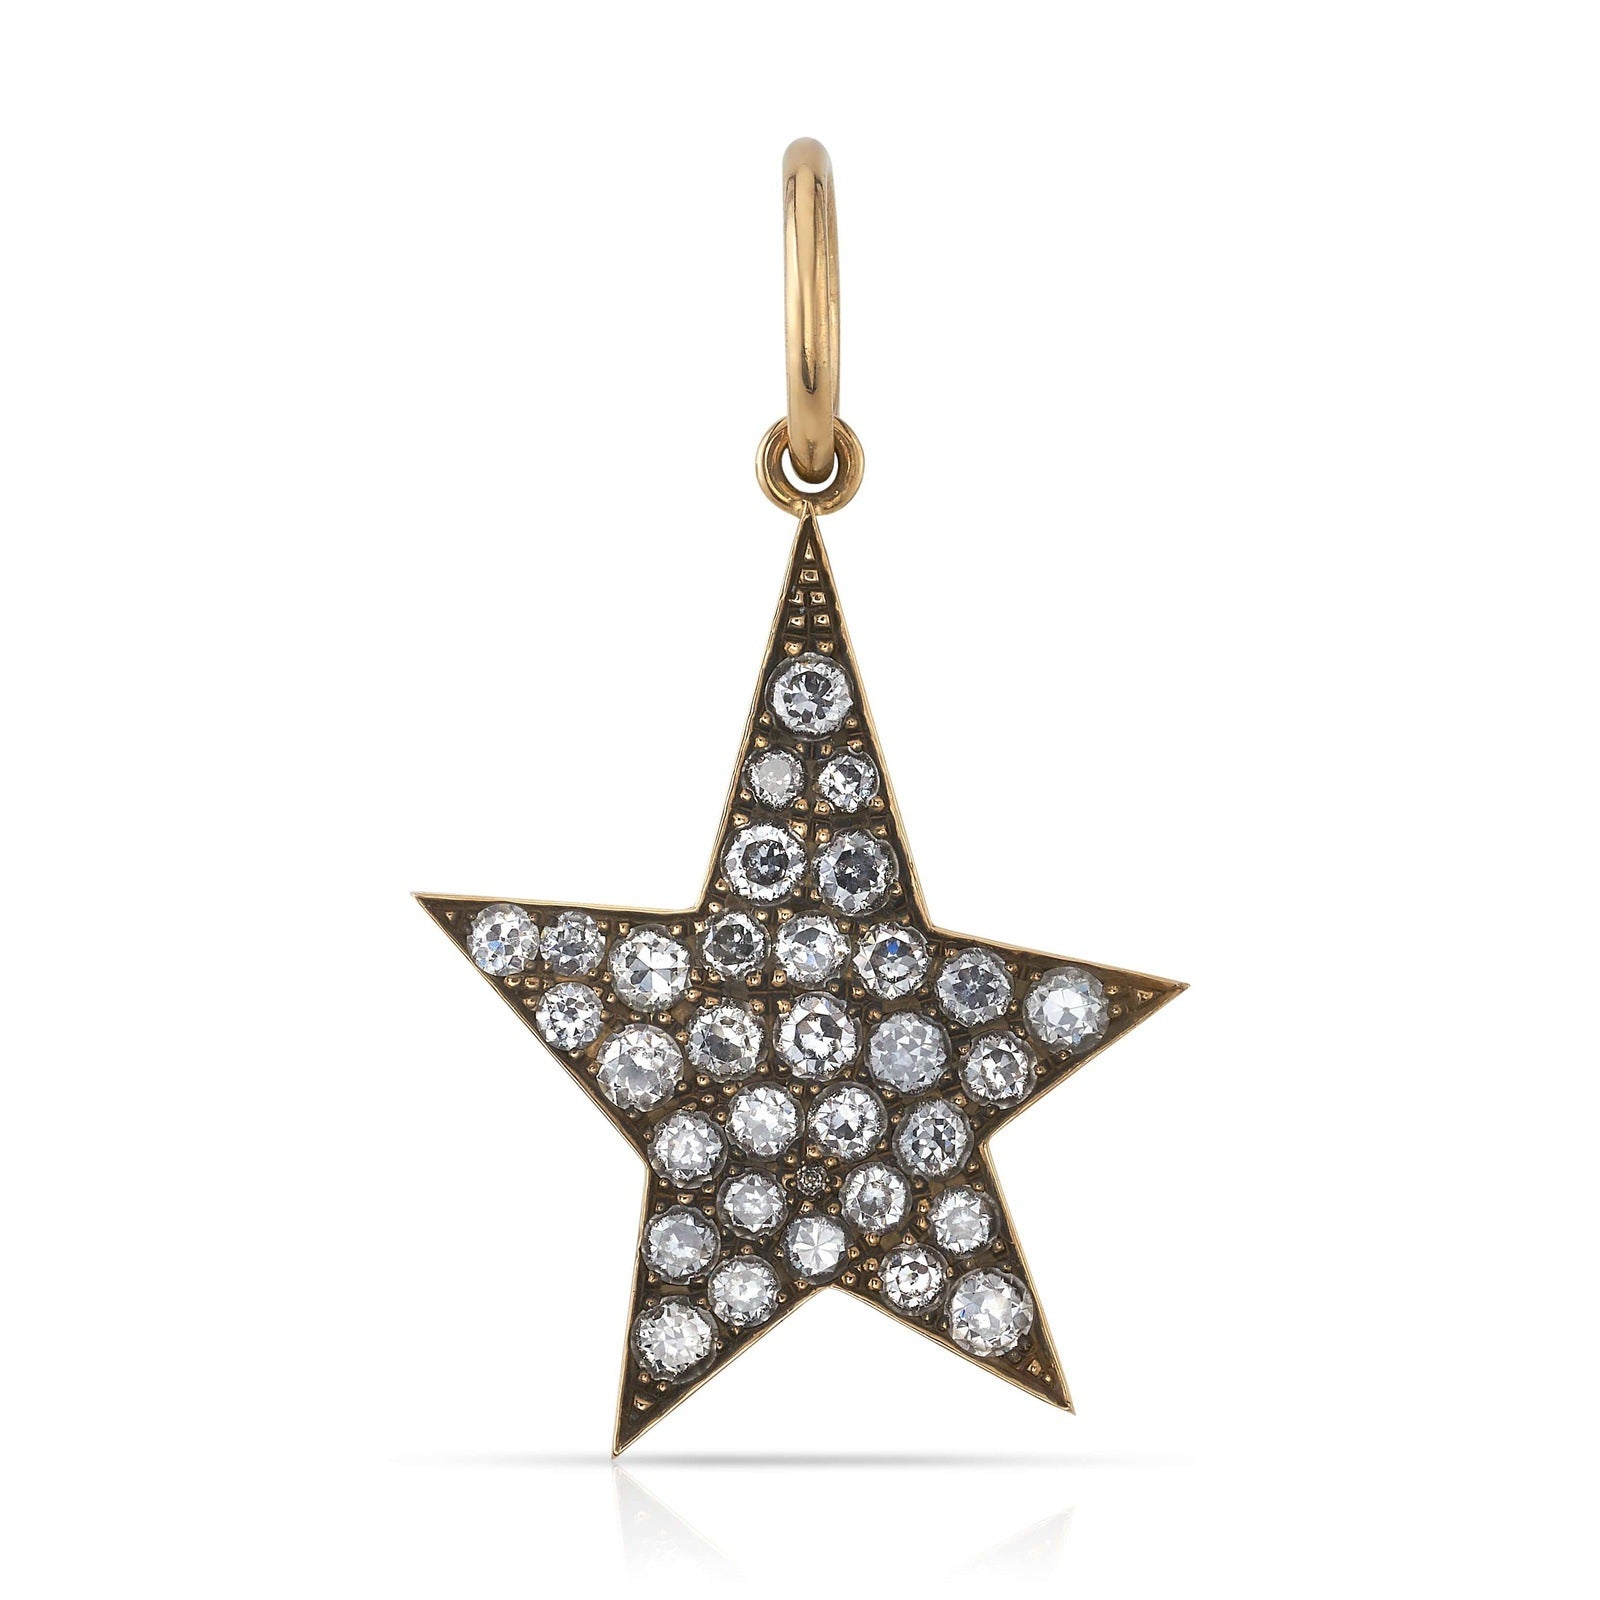 SINGLE STONE LARGE PAVE KINSLEY PENDANT featuring Approximately 4.00ctw G-H/VS-SI old European cut diamonds pave set in a handcrafted asymmetrical 18K yellow gold star charm. Available in an oxidized or polished finish. Charm measures 30mm x 40mm. Price d